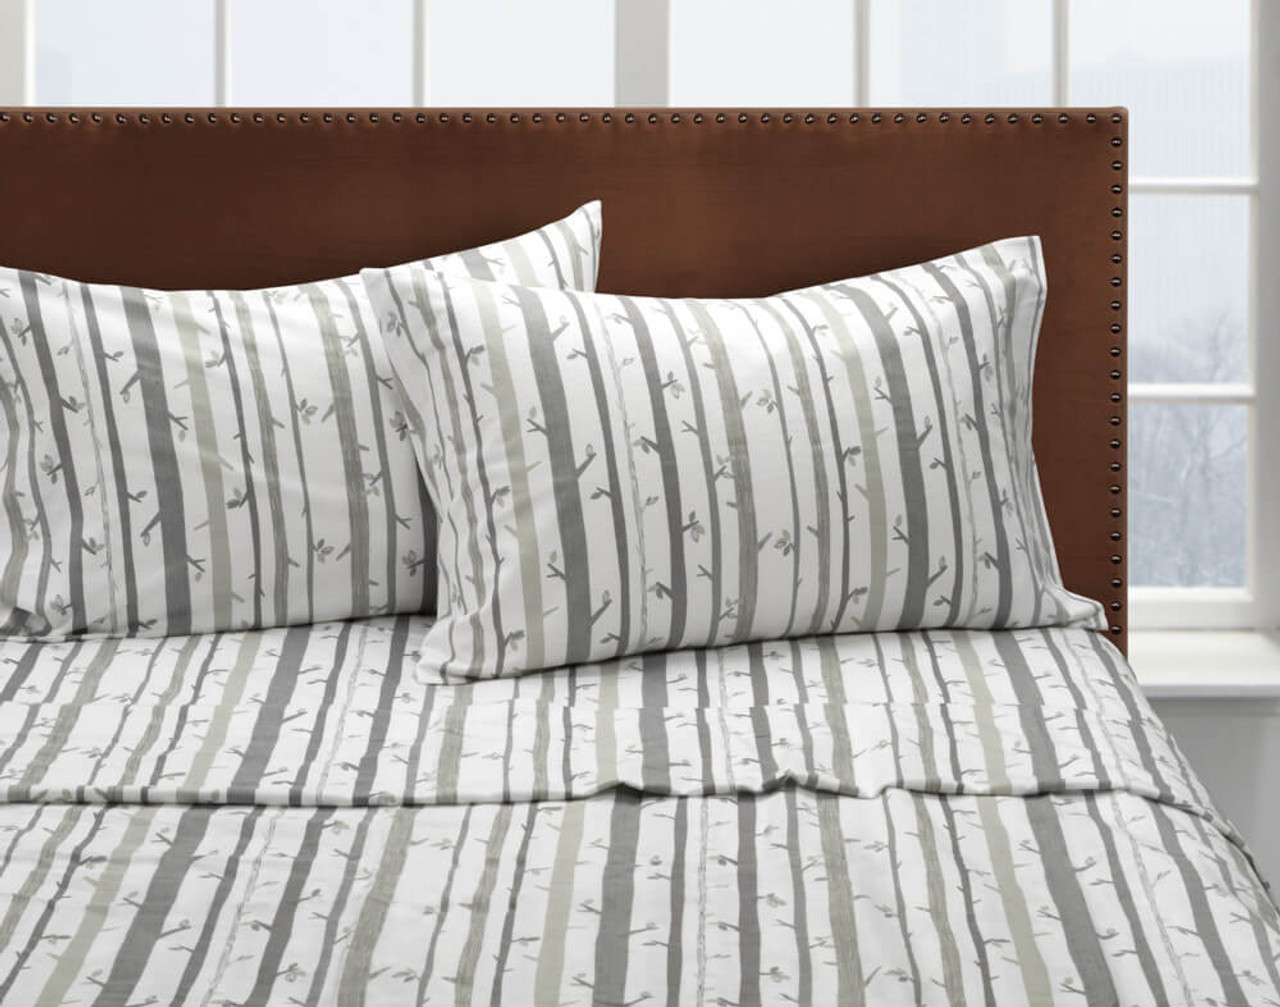 Front view of our Snowtrees Flannel Cotton Sheet Set dressed over a bed.